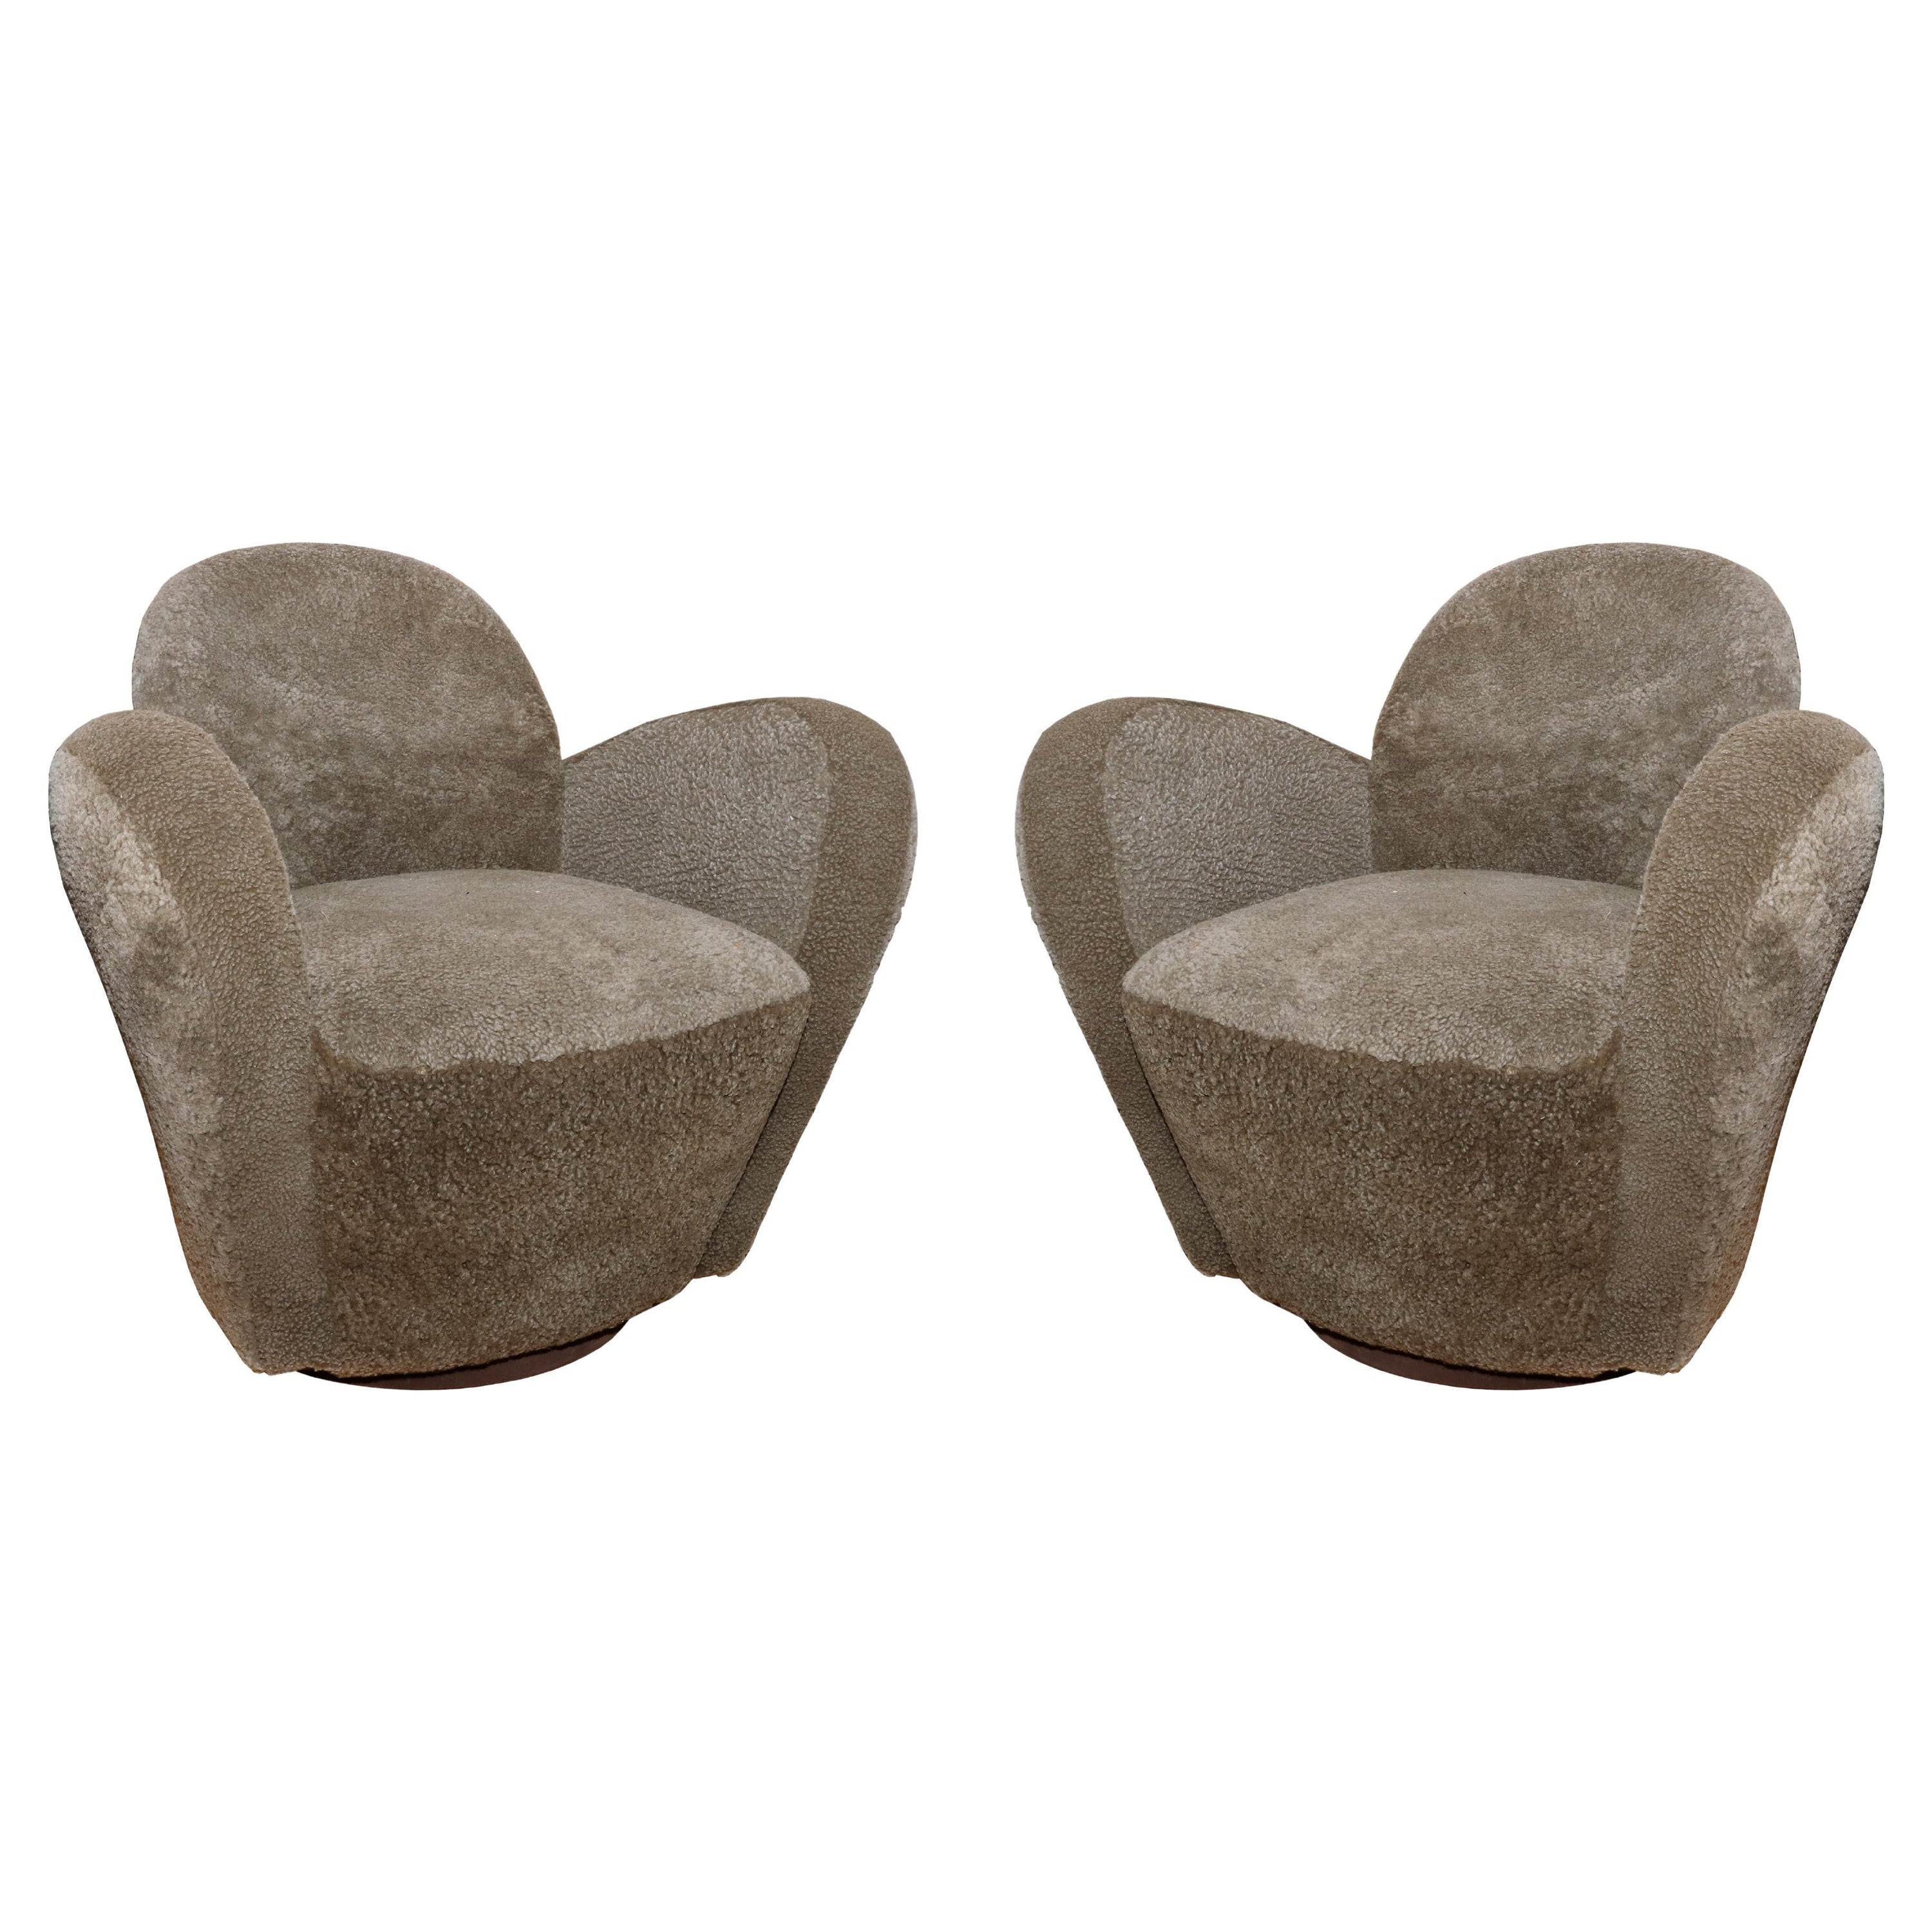 Pair of Swivel Armchairs in Sheep Skin by Michael Wolk "Miami Chair" c.1997 For Sale